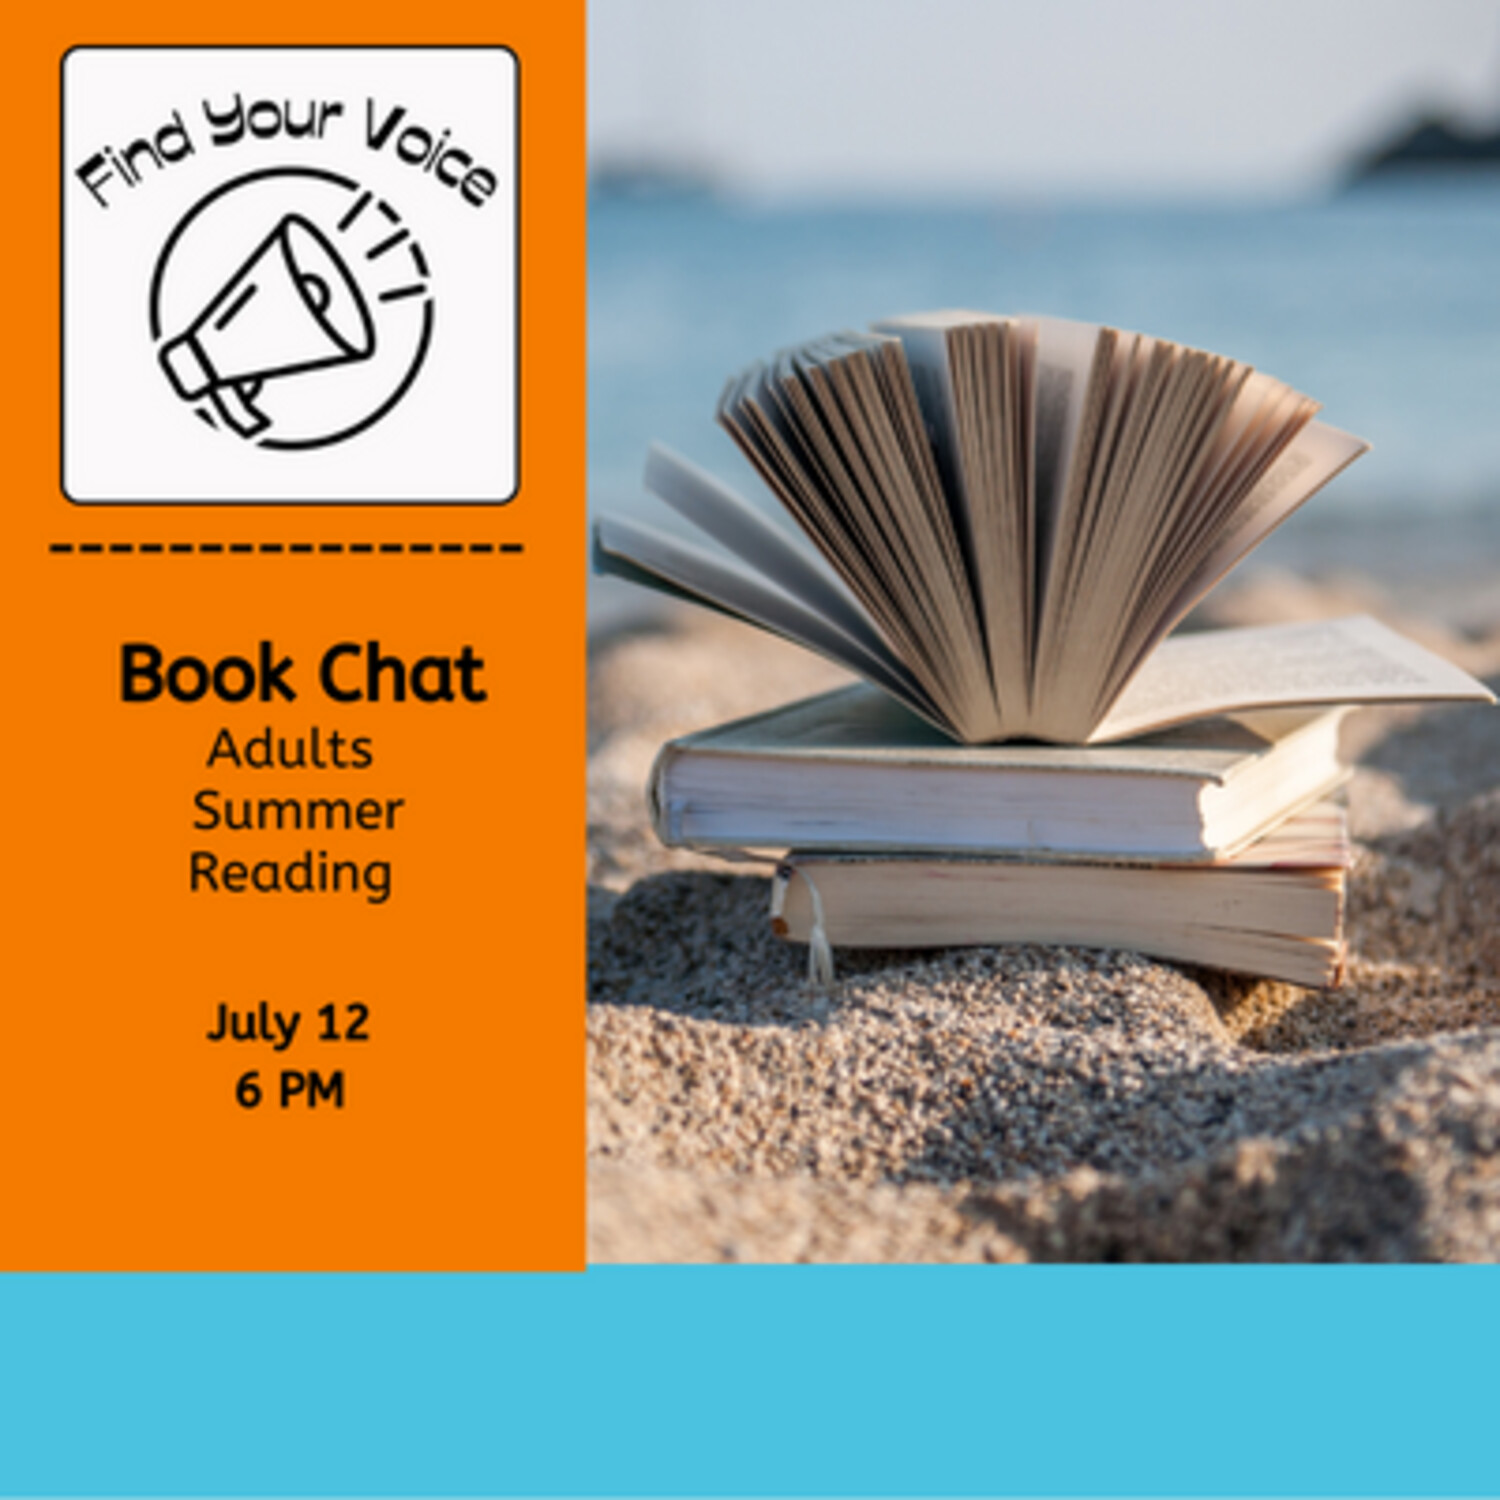 Summer Reading Book Chat Find Your Voice News Opinion Things To Do In The 